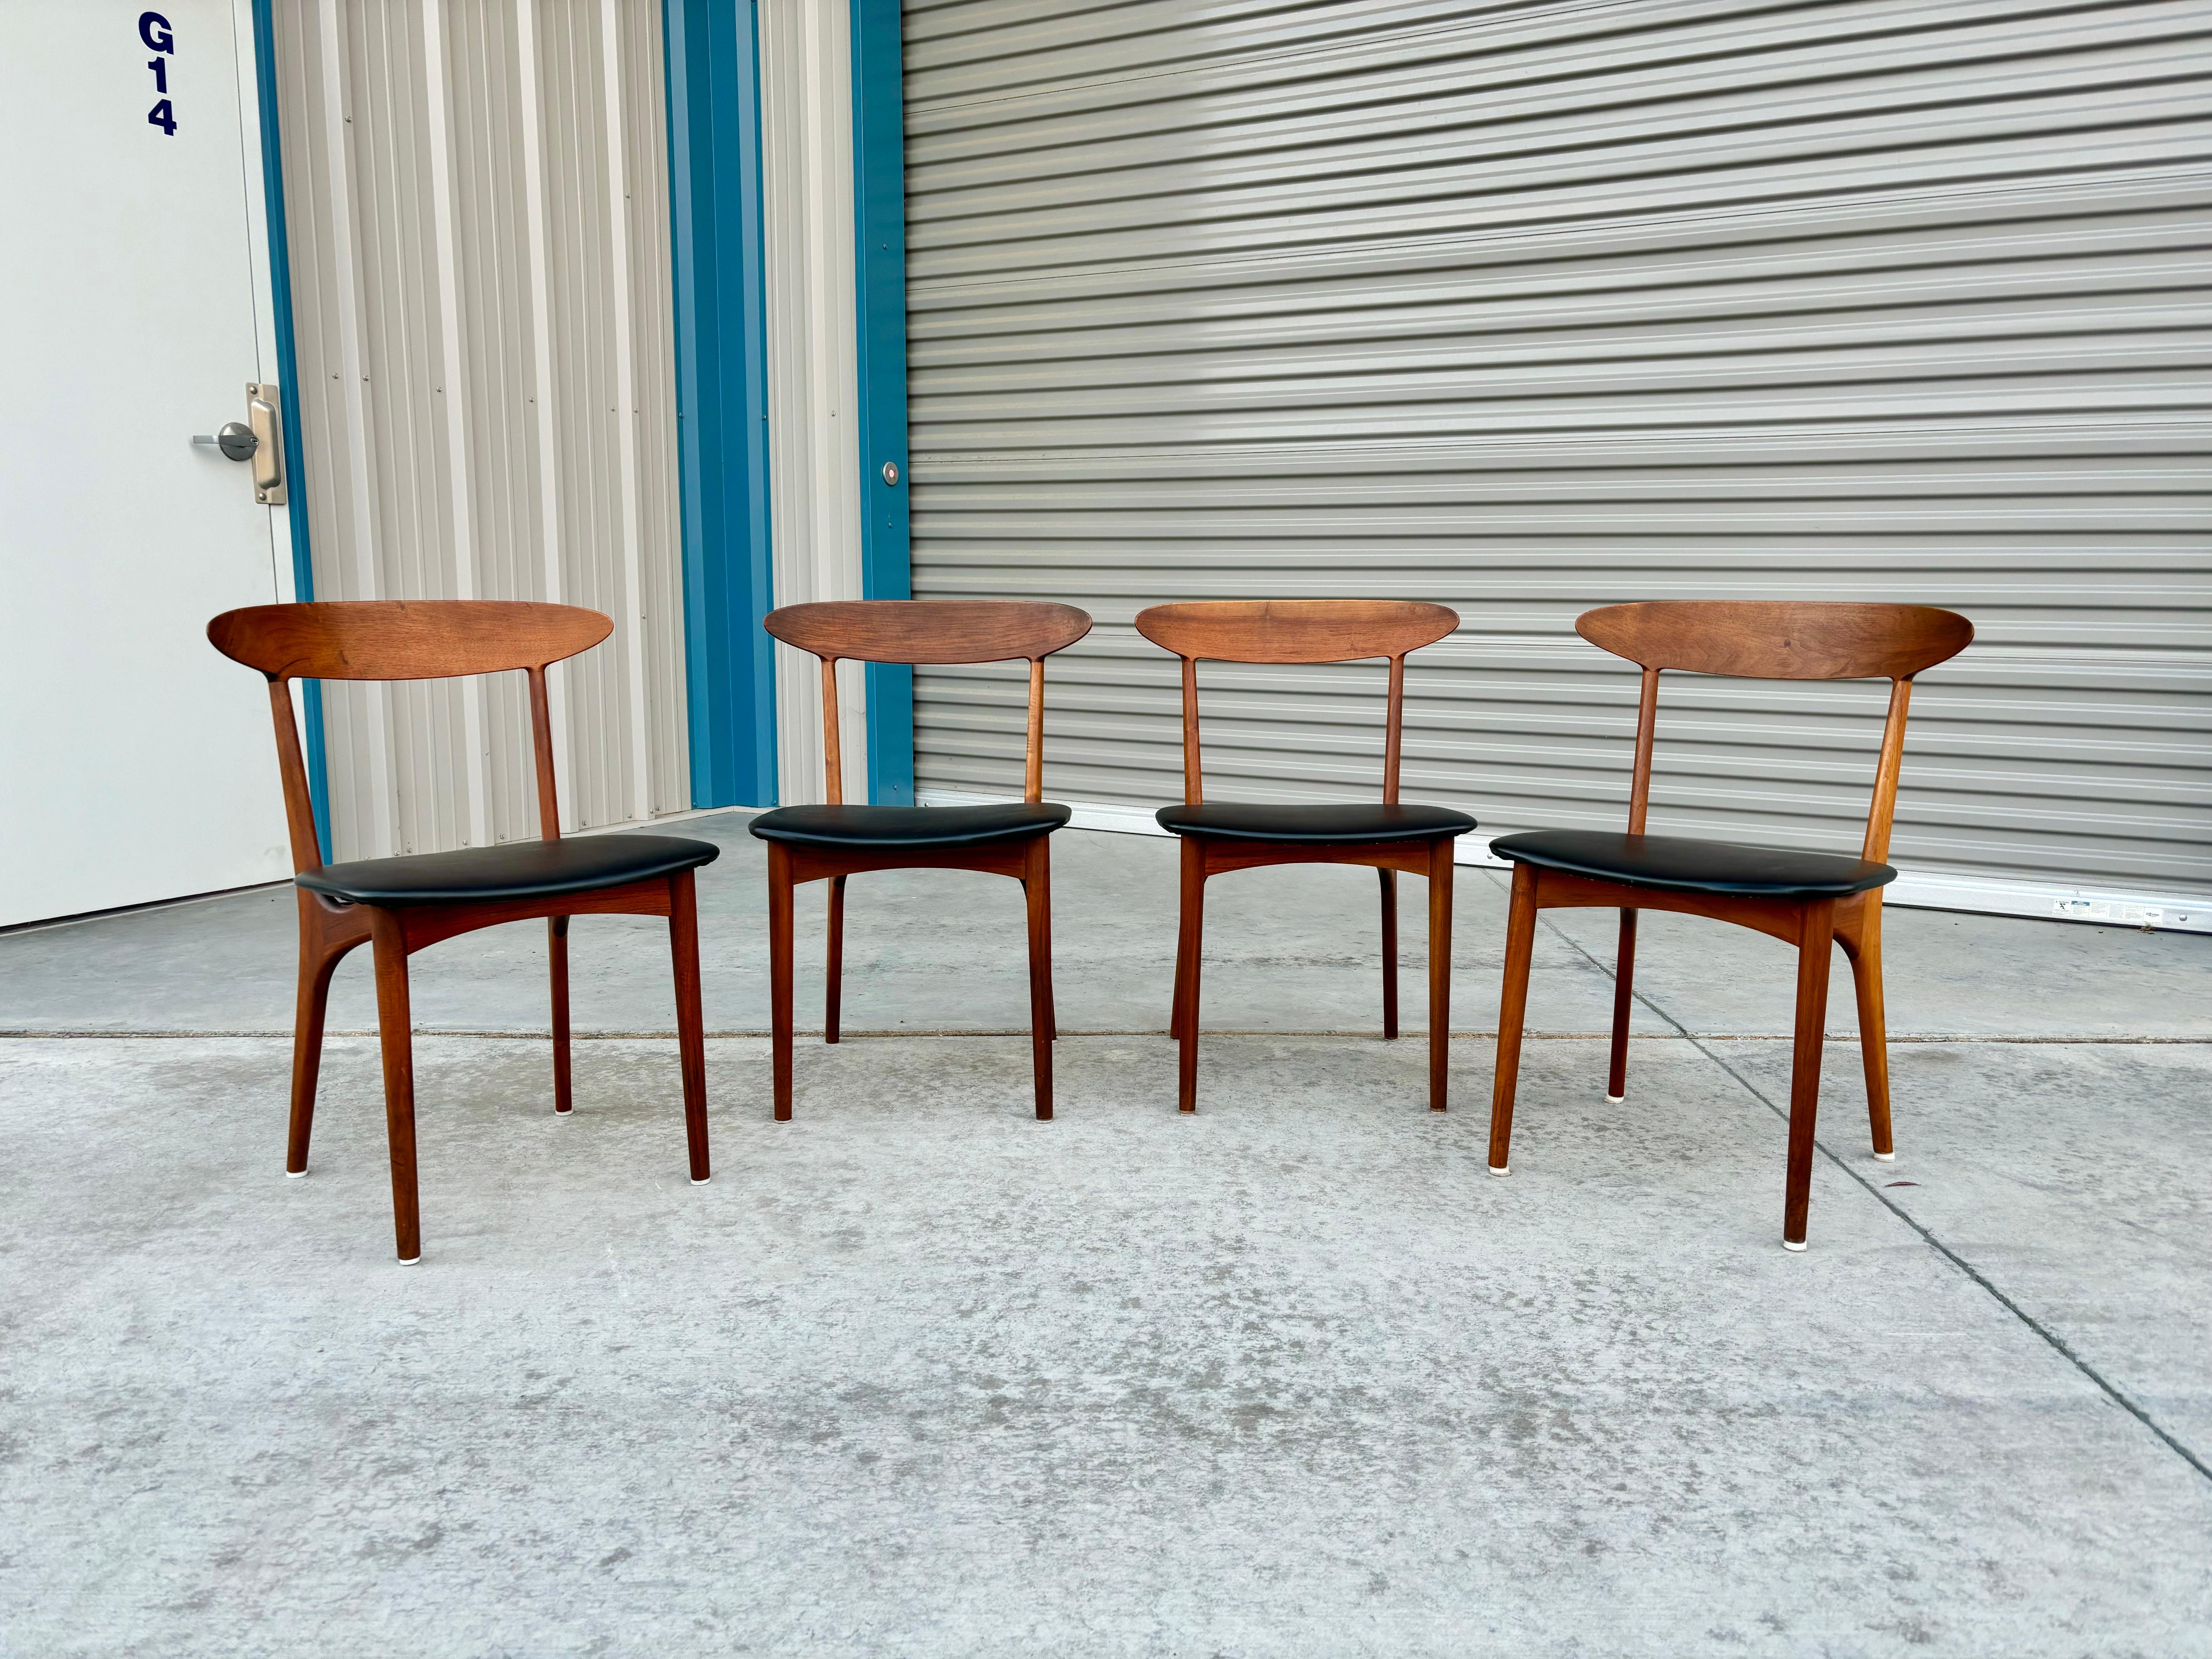 Danish modern teak dining chairs designed by Kurt Ostervig and manufactured by Brande Møbelindustri in Denmark circa the 1960s. These dining chairs feature a black leather upholstery that sits on top of a beautiful teak frame. What makes this set